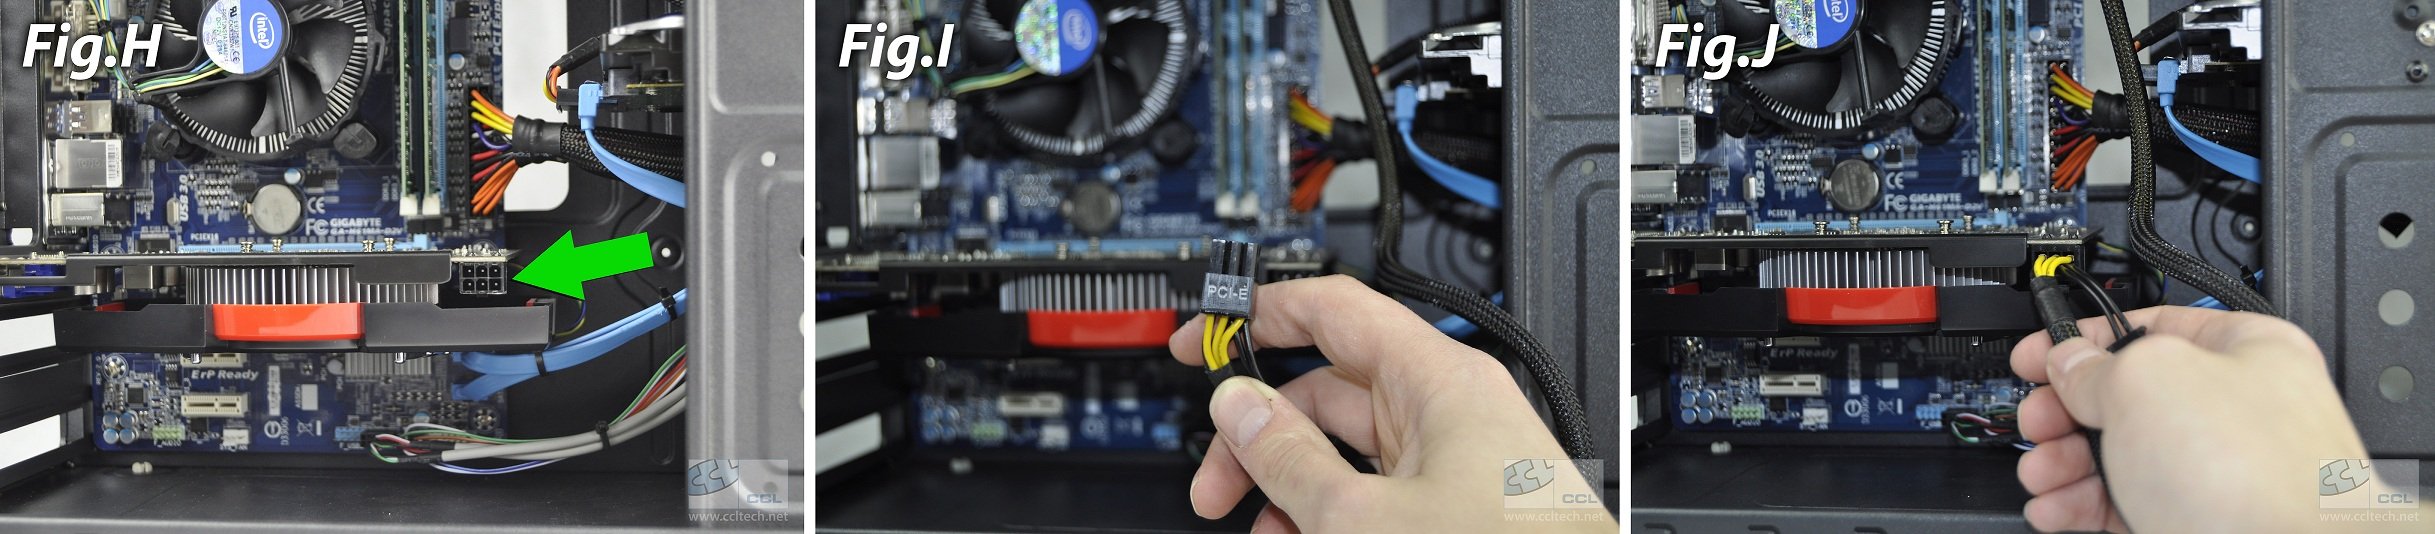 Please power down and connect the. Dell GPU Power Cable 12 Pin. Please Power down and connect the PCIE Power Cable for this Graphics Card. Please Power down and connect the PCIE Power Cable for this Graphics Card что делать. Monitor connection with GPU.